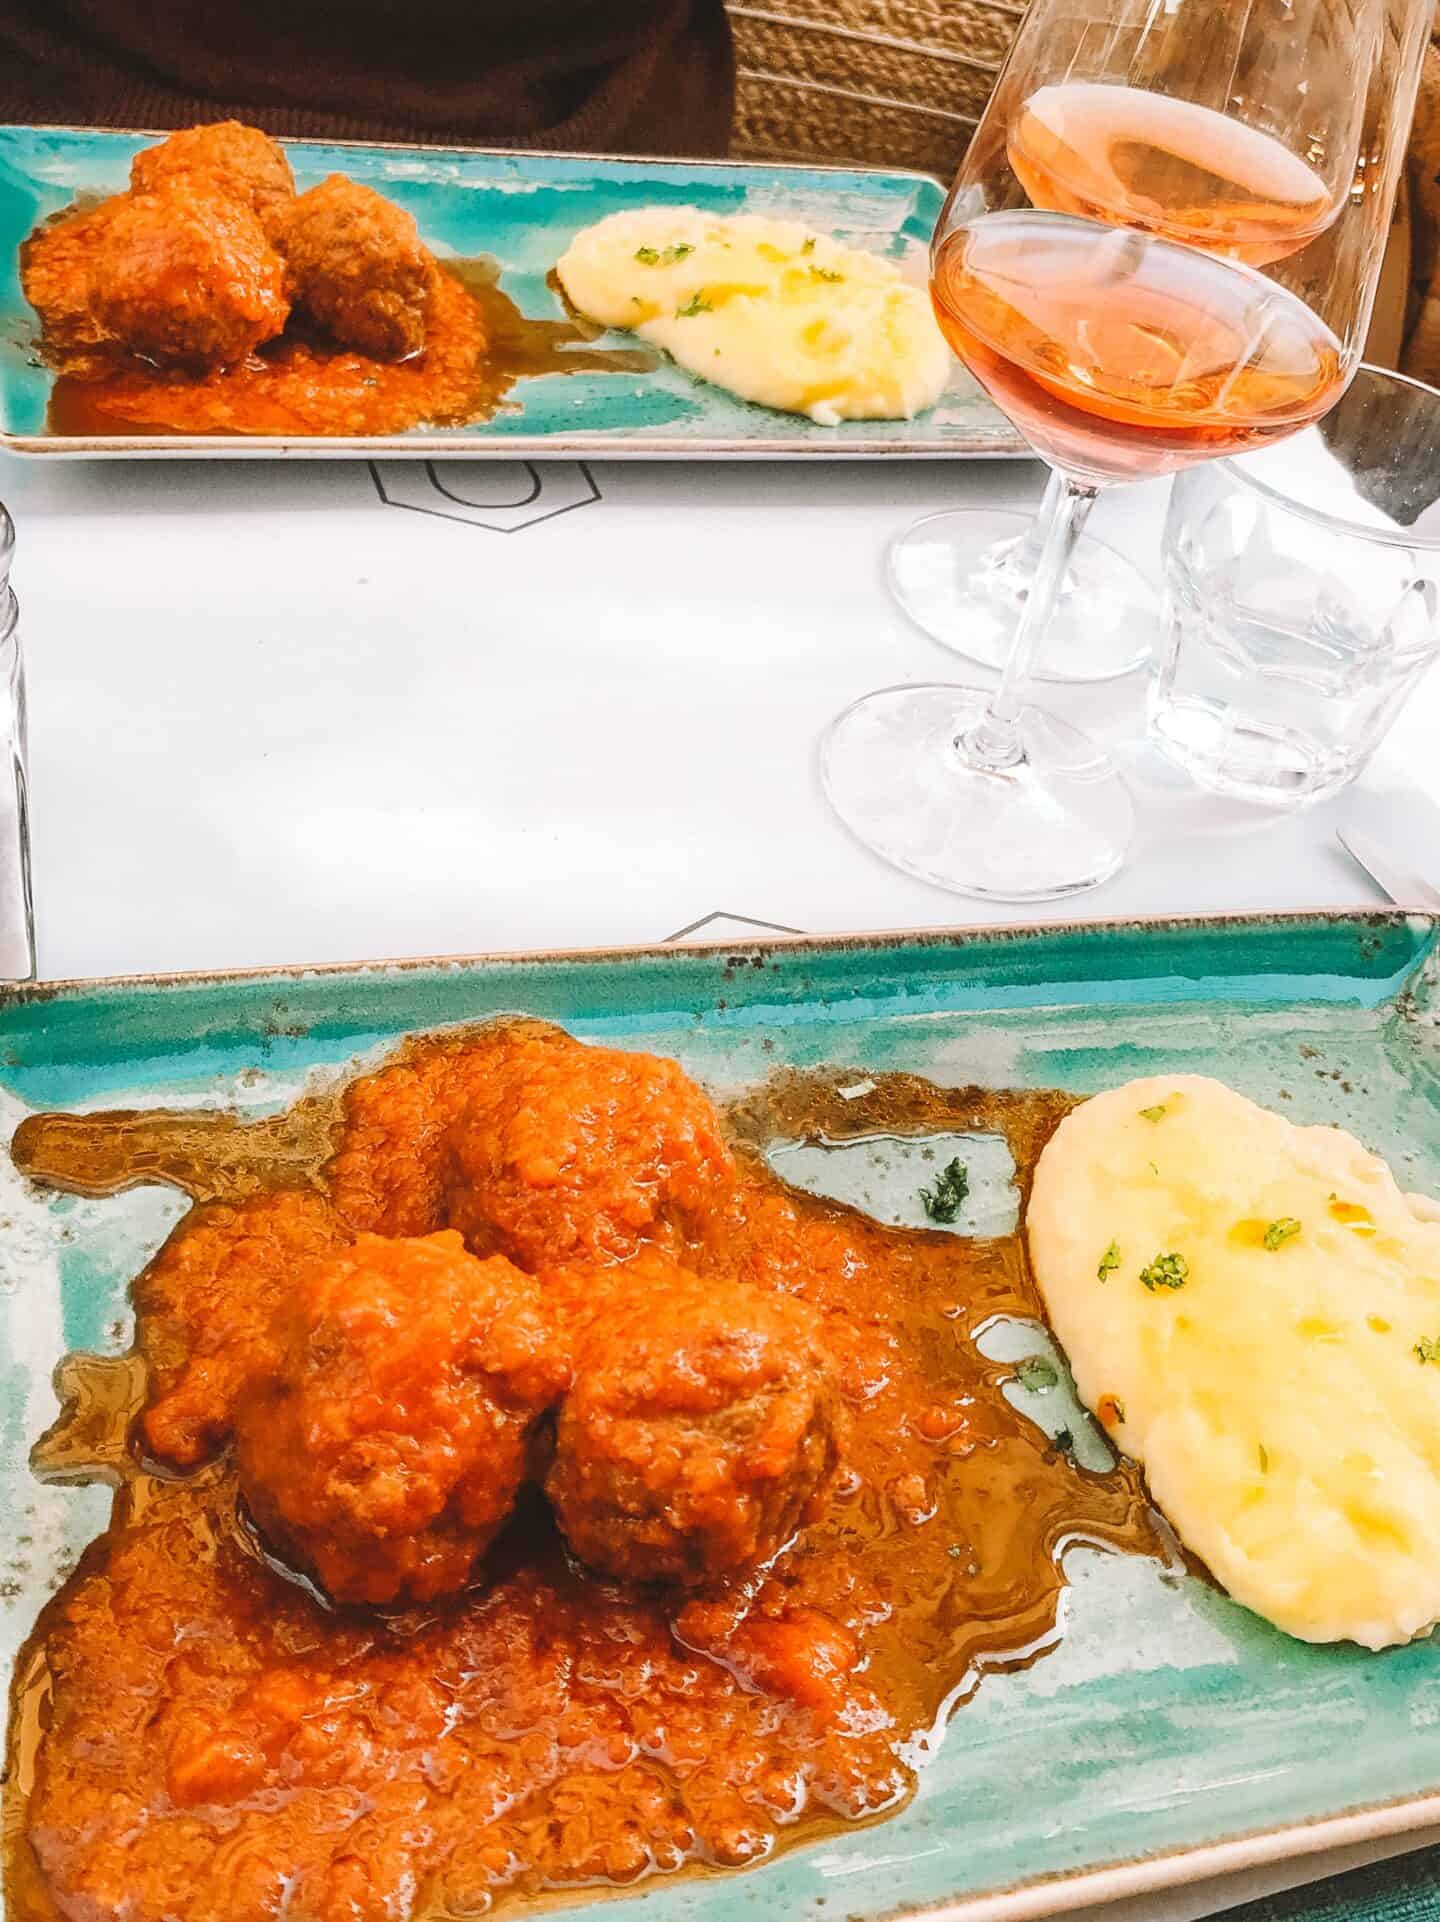 Meatballs and mashed potatoes from Trattoria San Lorenzo in Florence 